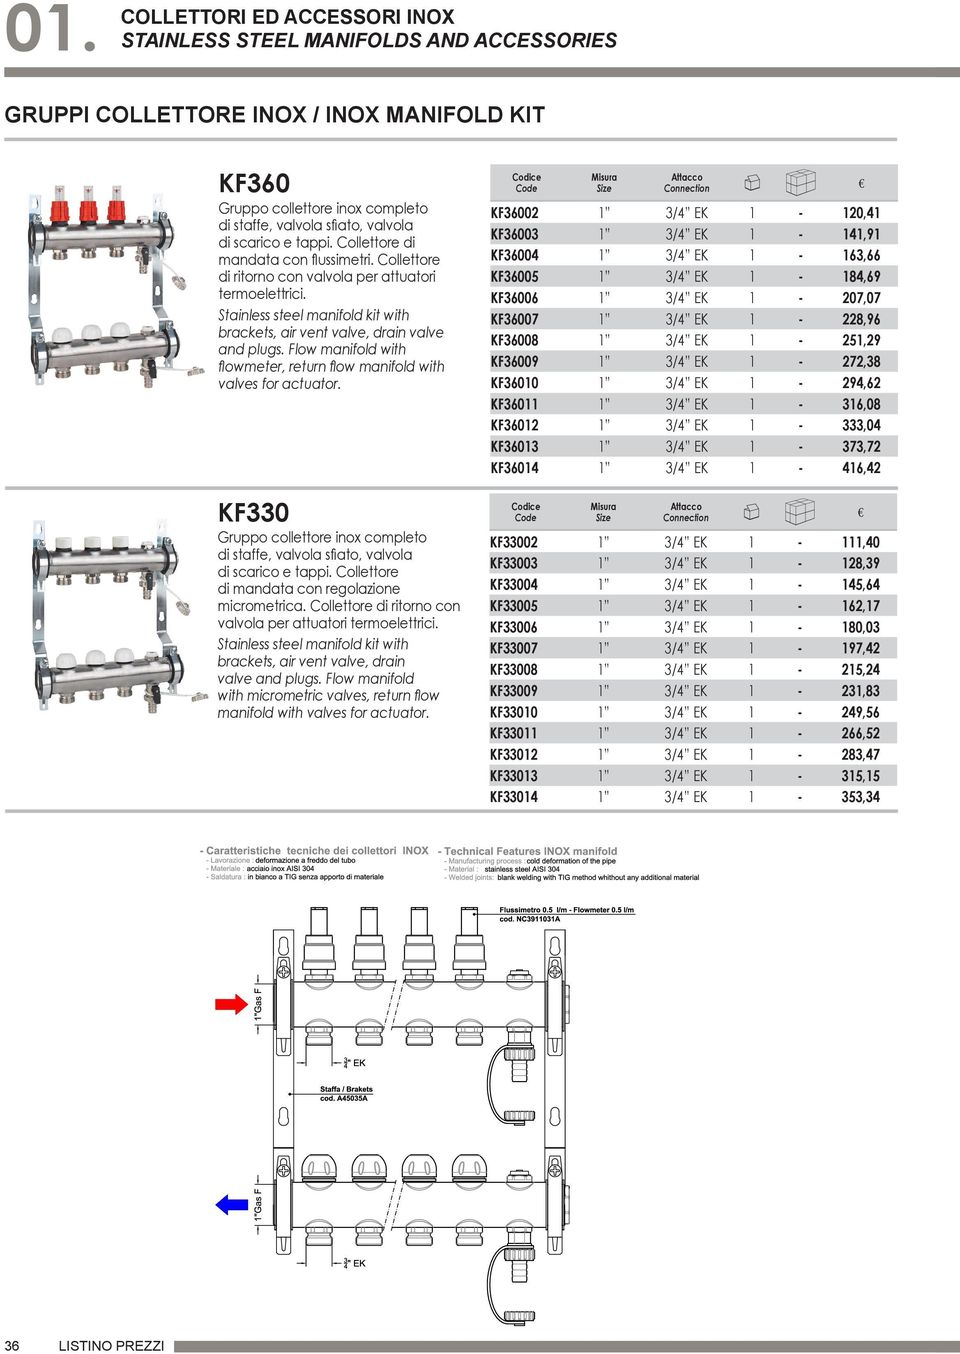 Stainless steel manifold kit with brackets, air vent valve, drain valve and plugs. Flow manifold with flowmeter, return flow manifold with valves for actuator.